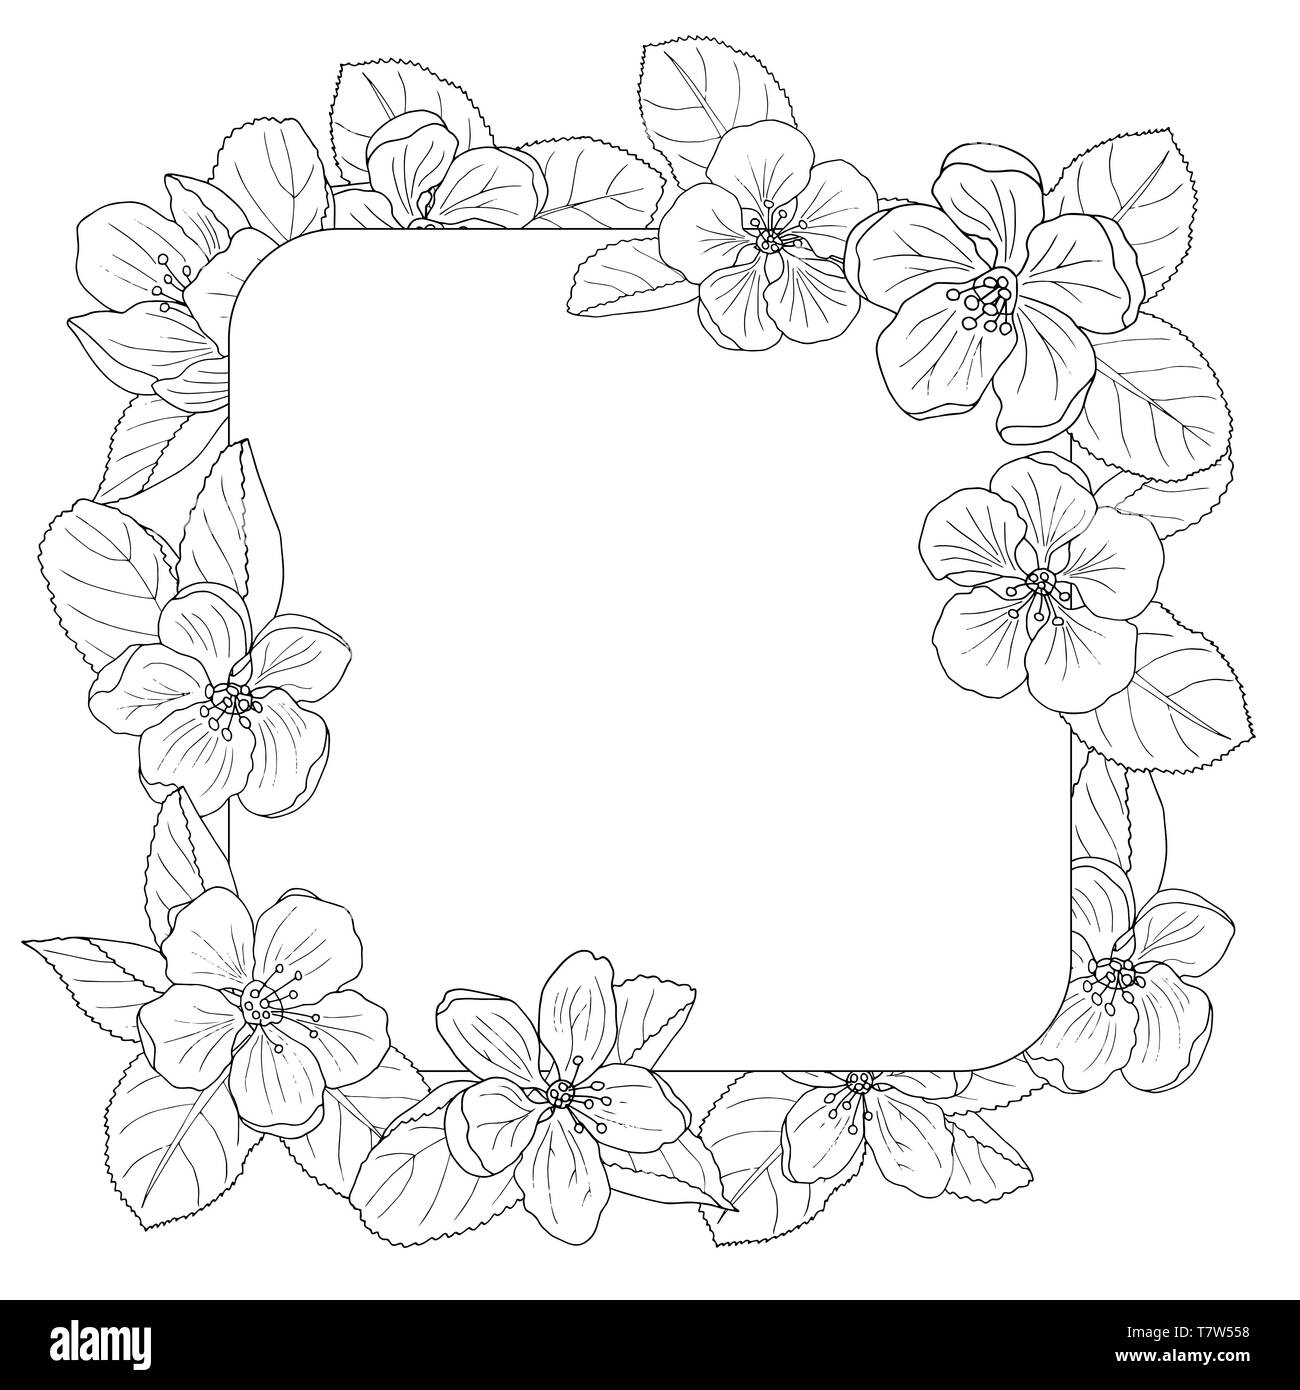 Beautiful Apple Blossom Frame Coloring Page For Adults And Children Stock Vector Image Art Alamy